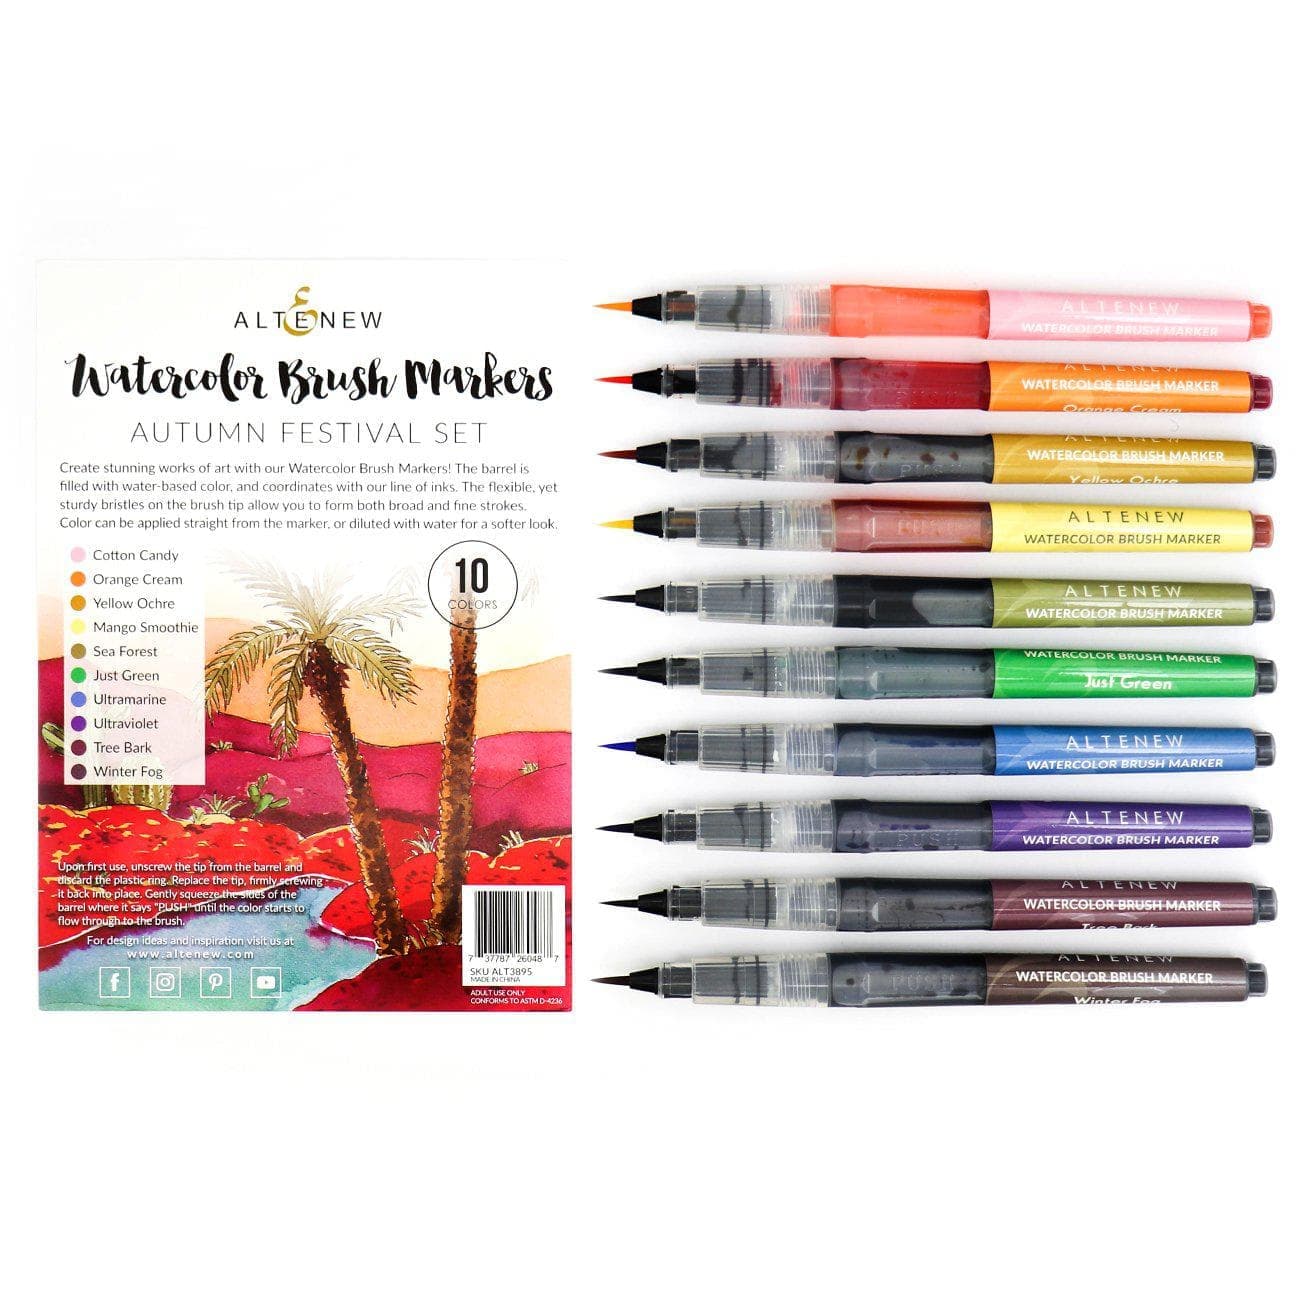 Water-based Markers Watercolor Brush Markers - Autumn Festival Set